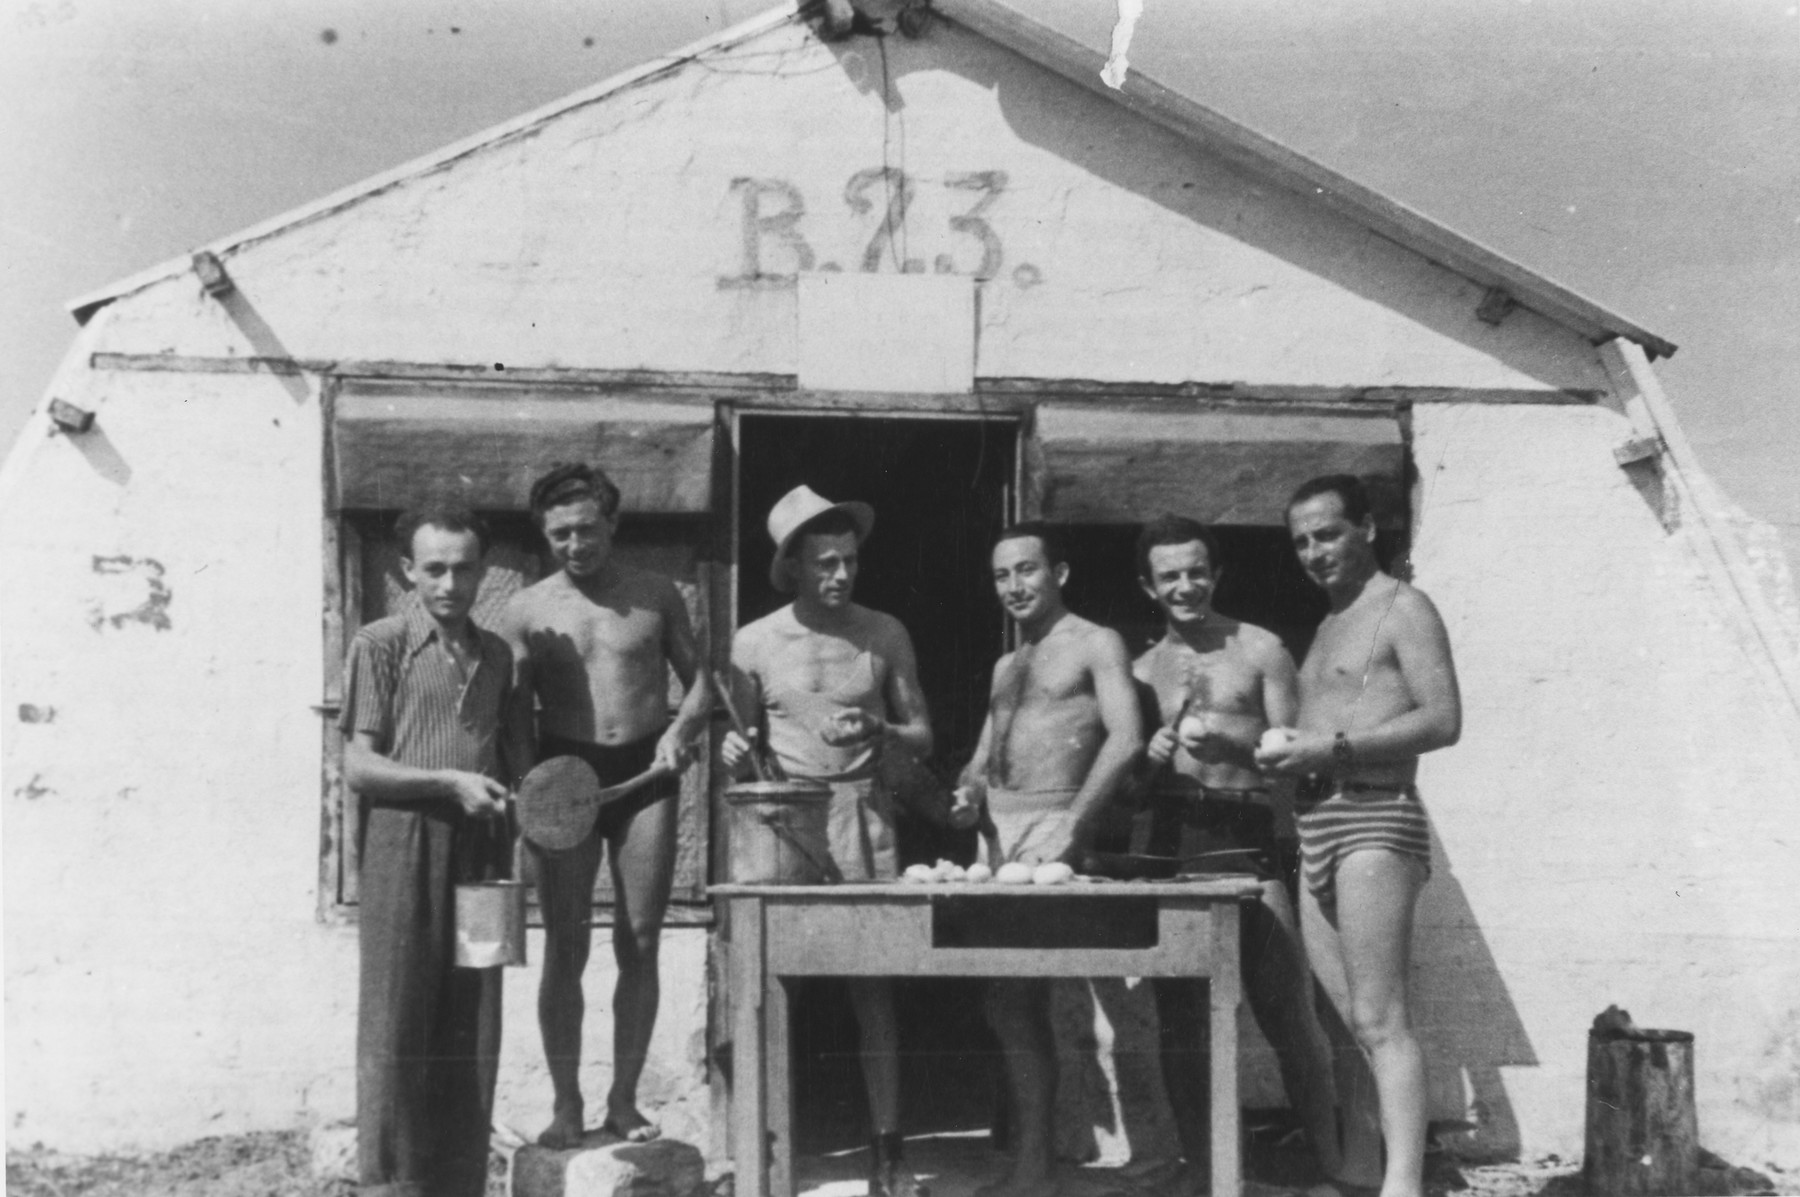 Jewish DPs peel potatoes outside barracks 23 in Santa Maria di Leuca.

Pinkus Gipsman is pictured second from the left.